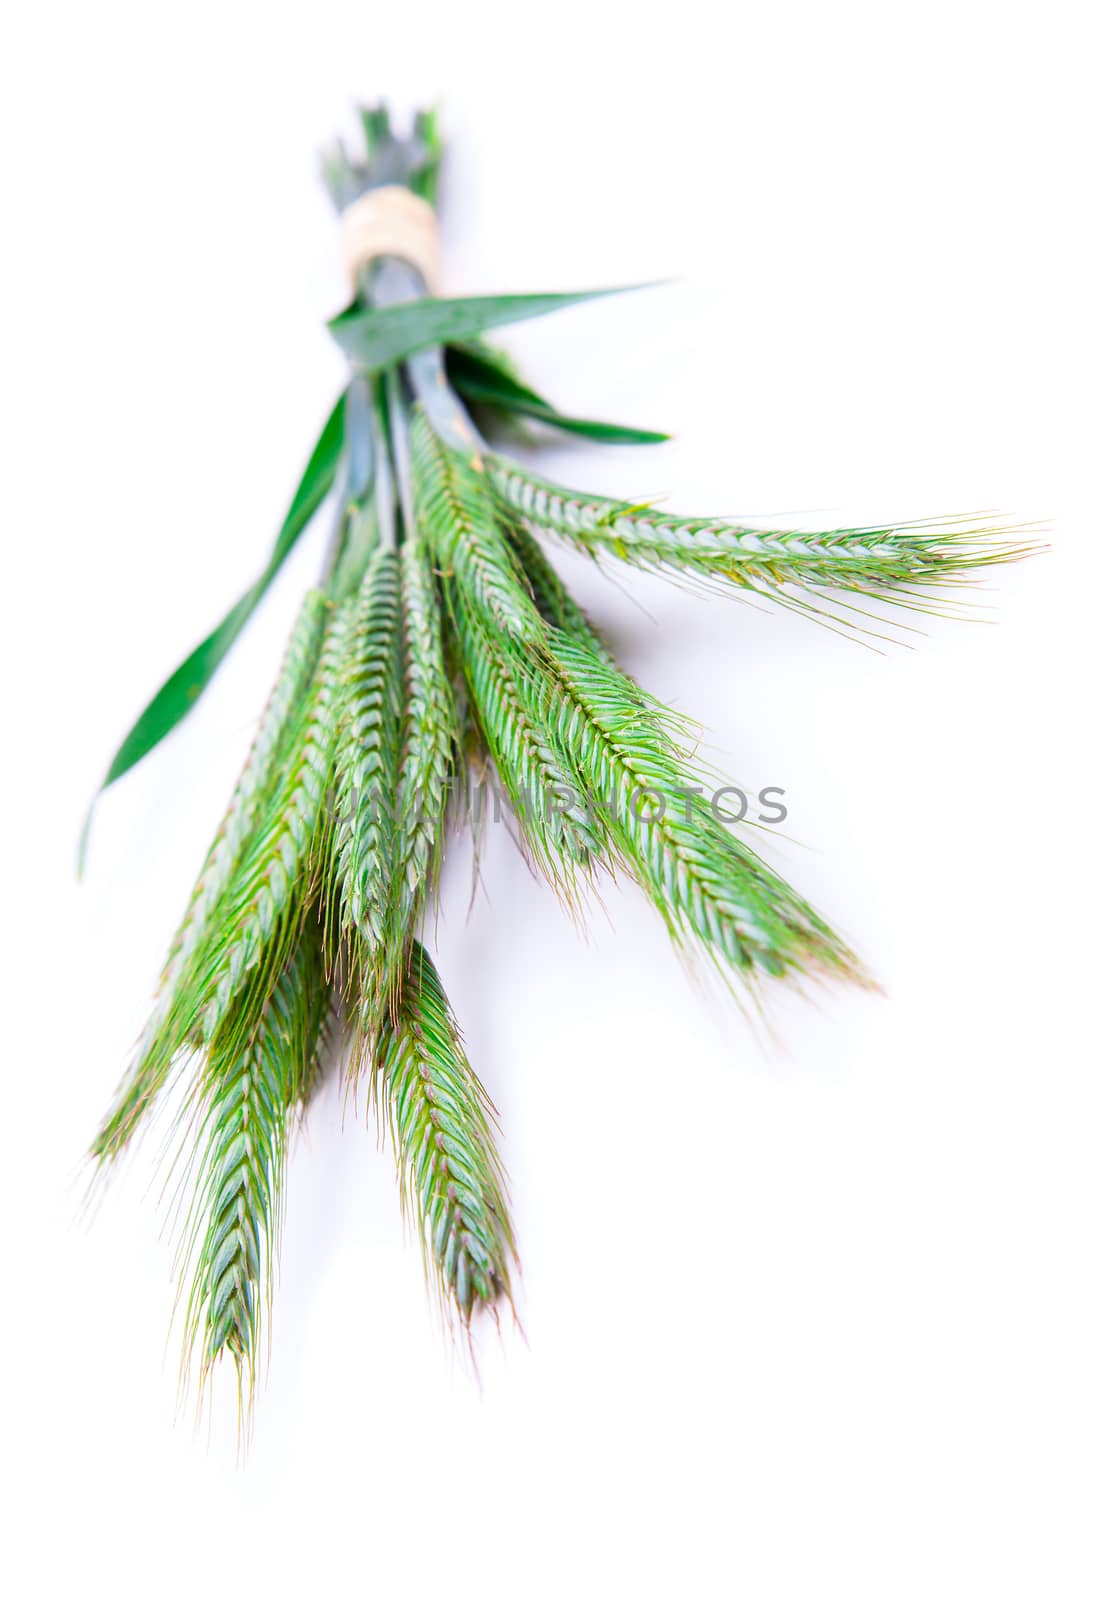 Green rye spikes (Secale cereale), on white background. by motorolka